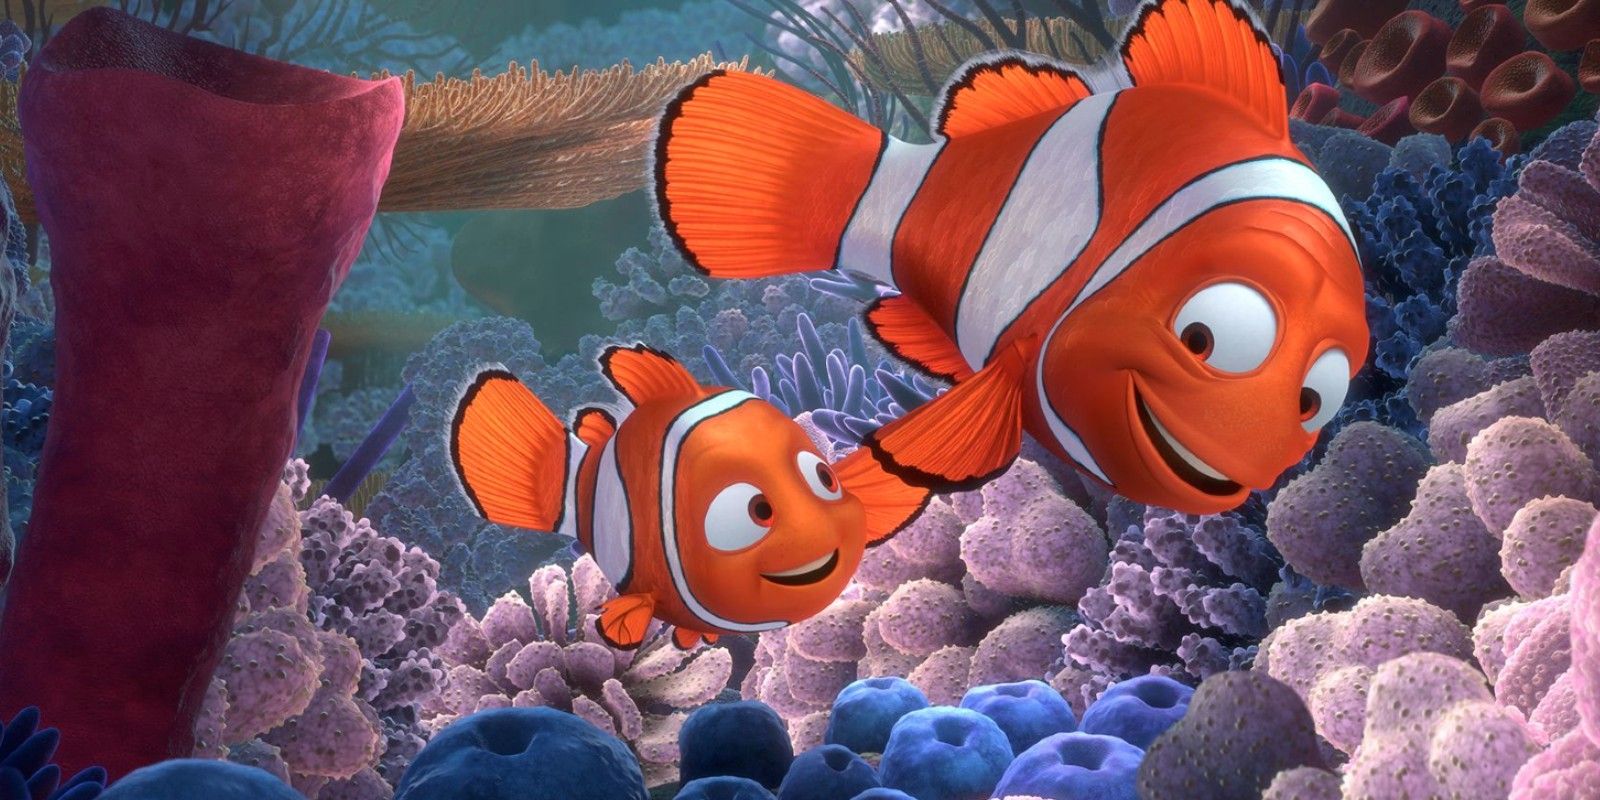 Finding Nemo scene of two fish swimming side by side.